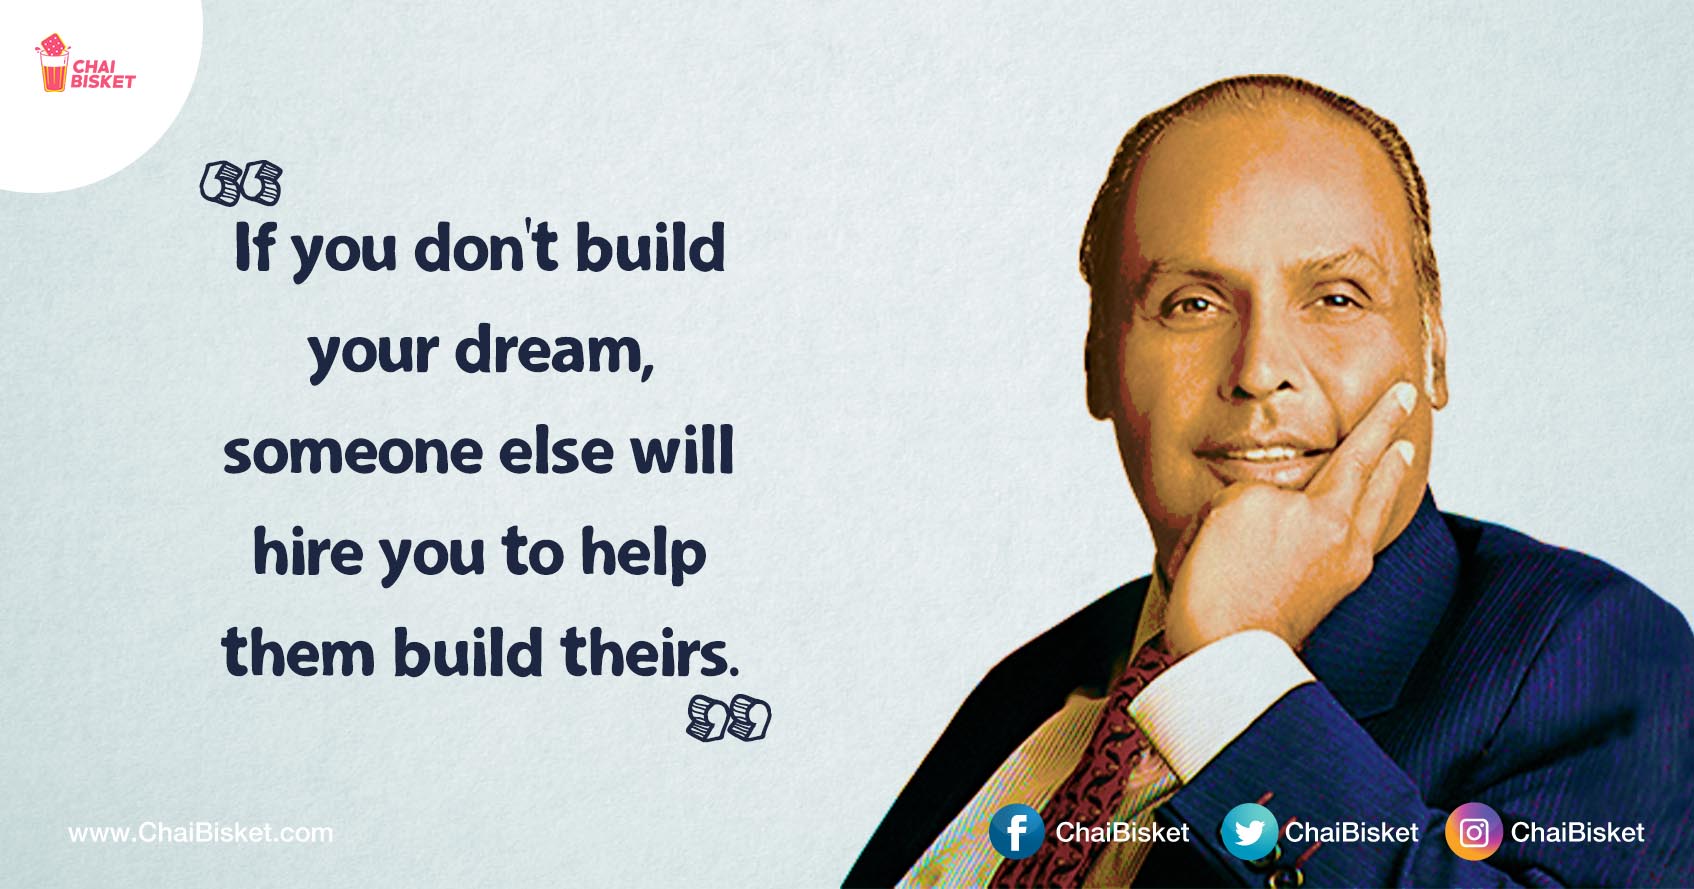 These Dhirubhai Ambani Quotes Will Push You To Work Hard Towards Your Dreams